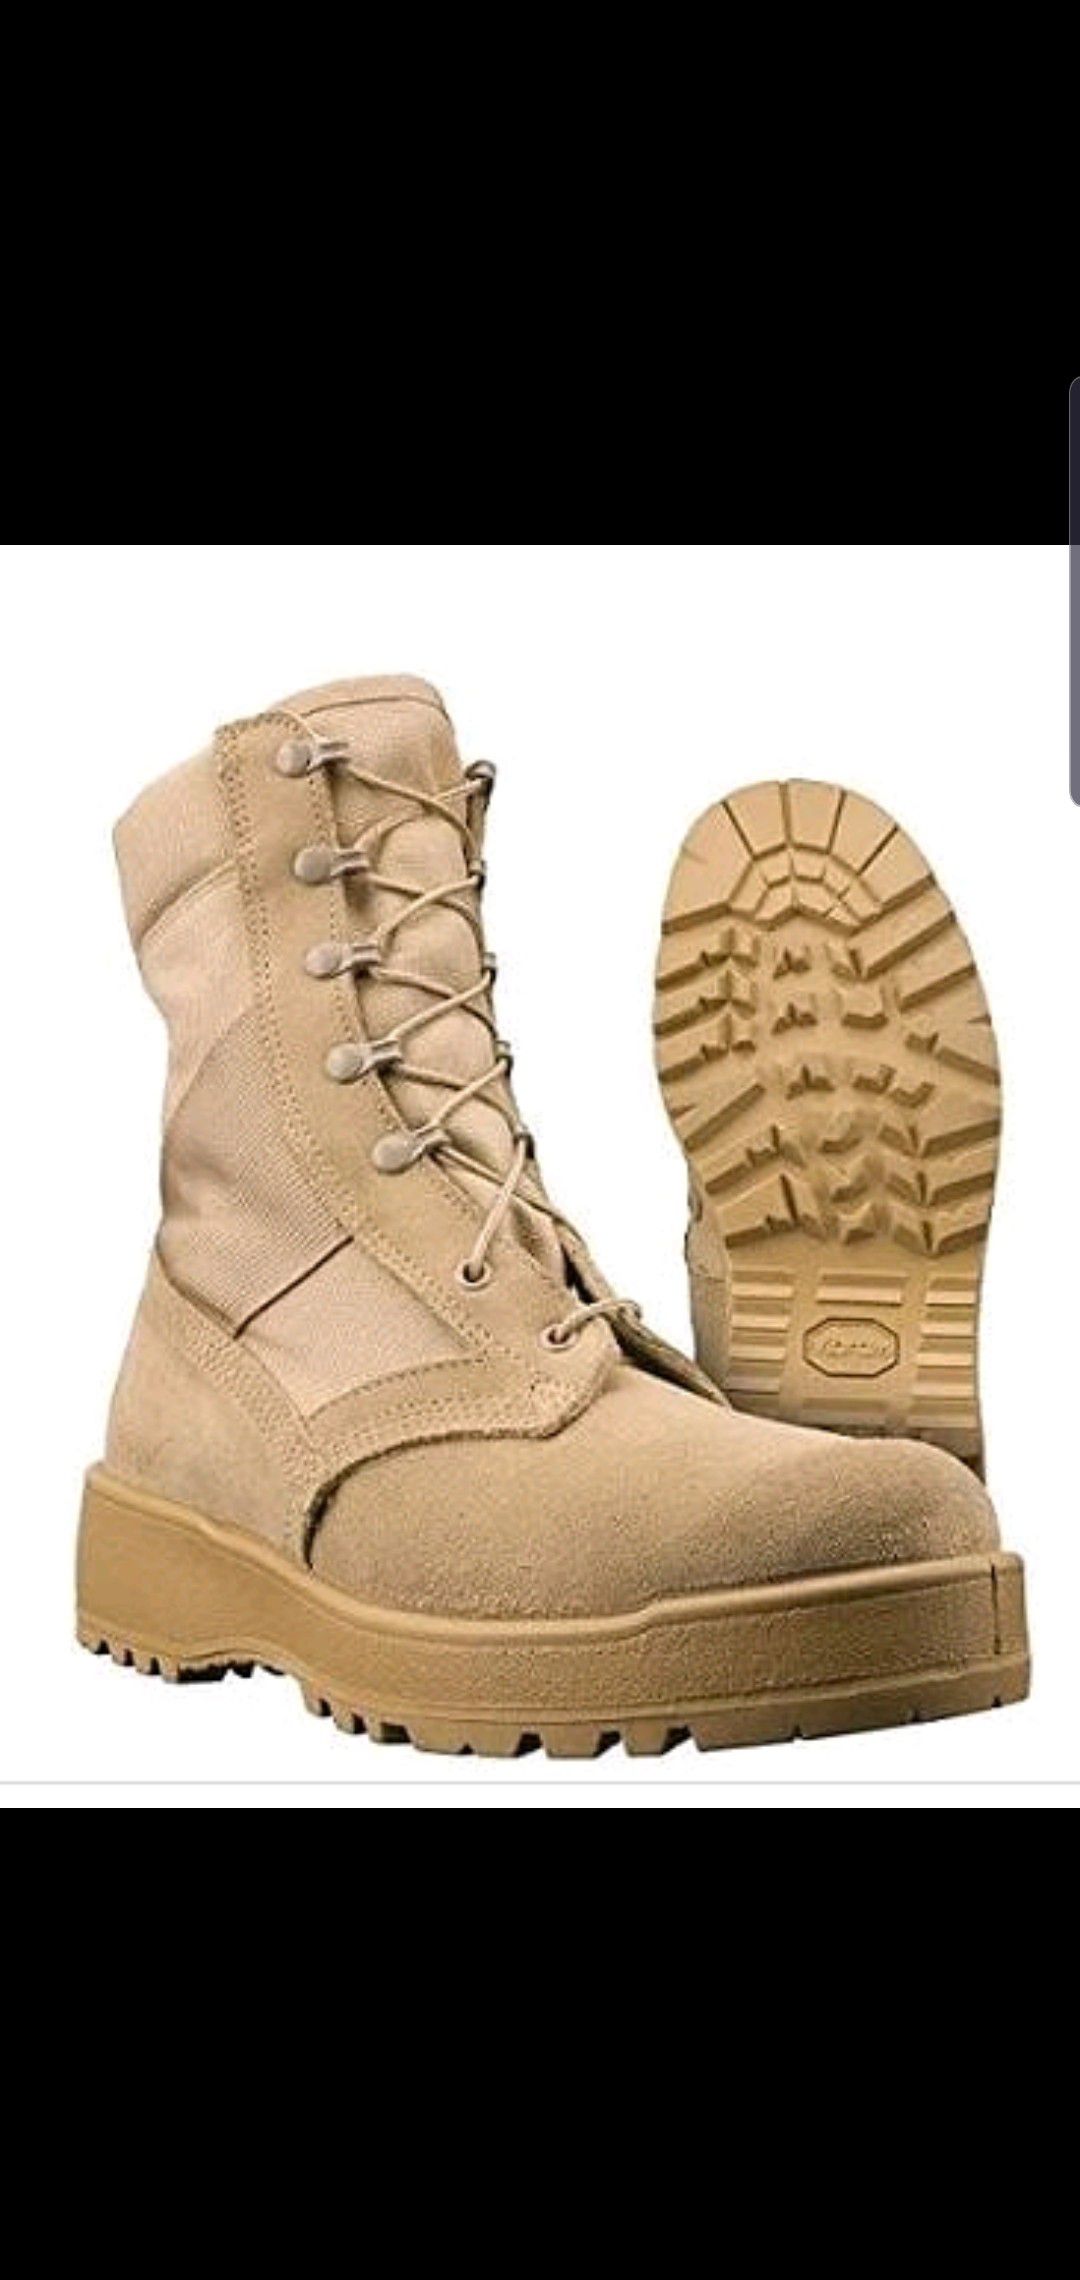 Size 10.5 female (8.5 male) Brand new standard issue army OCP combat boots